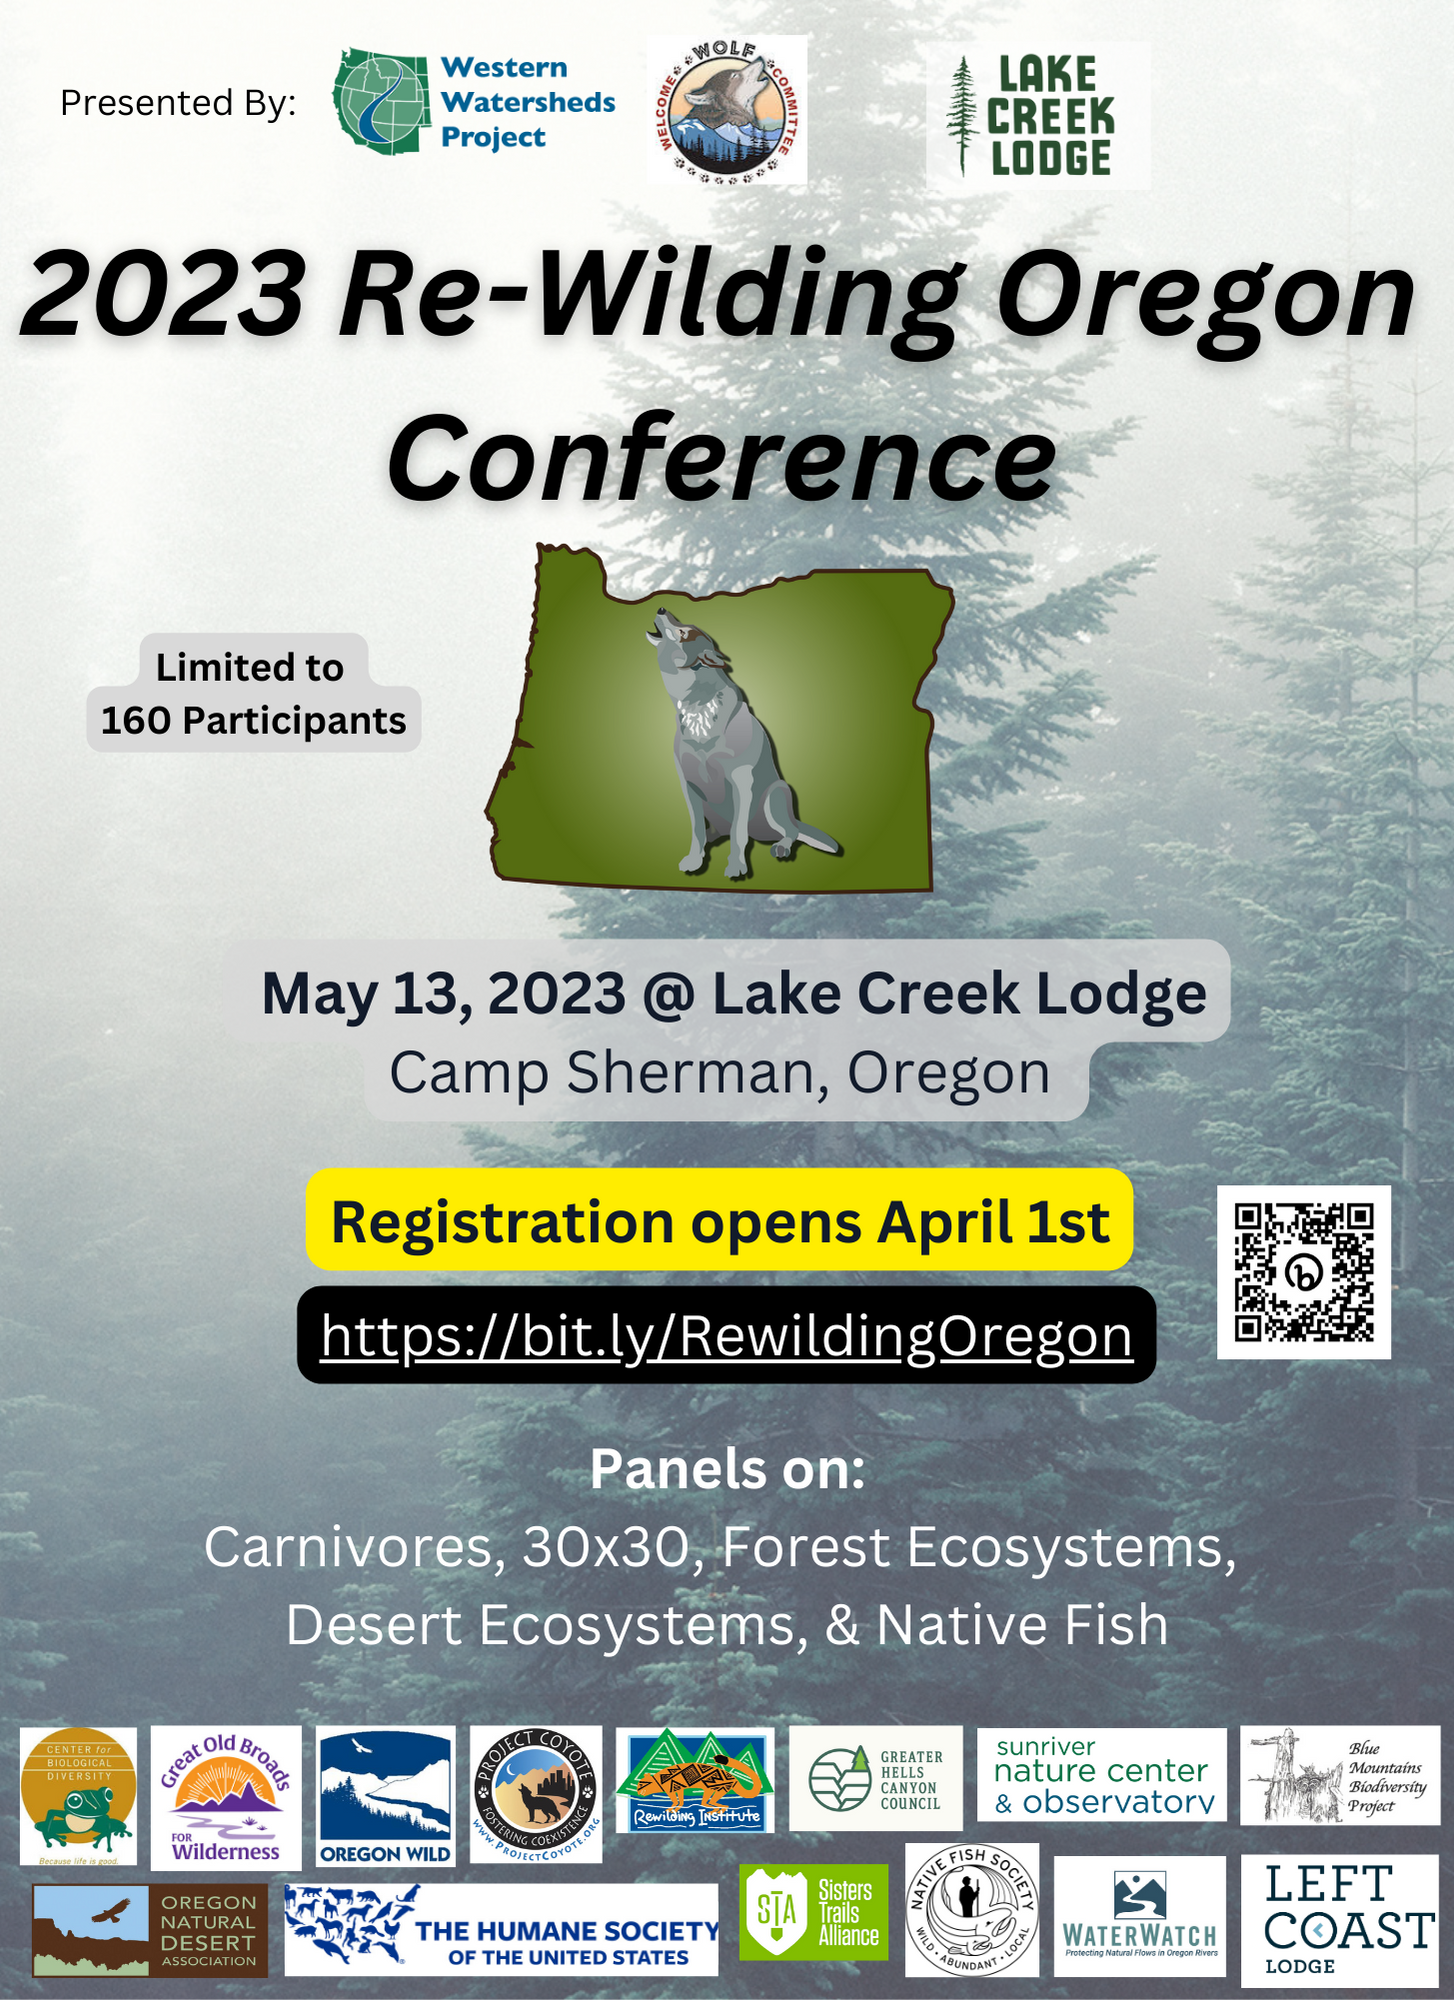 2023 Re-Wilding Oregon Conference Flyer